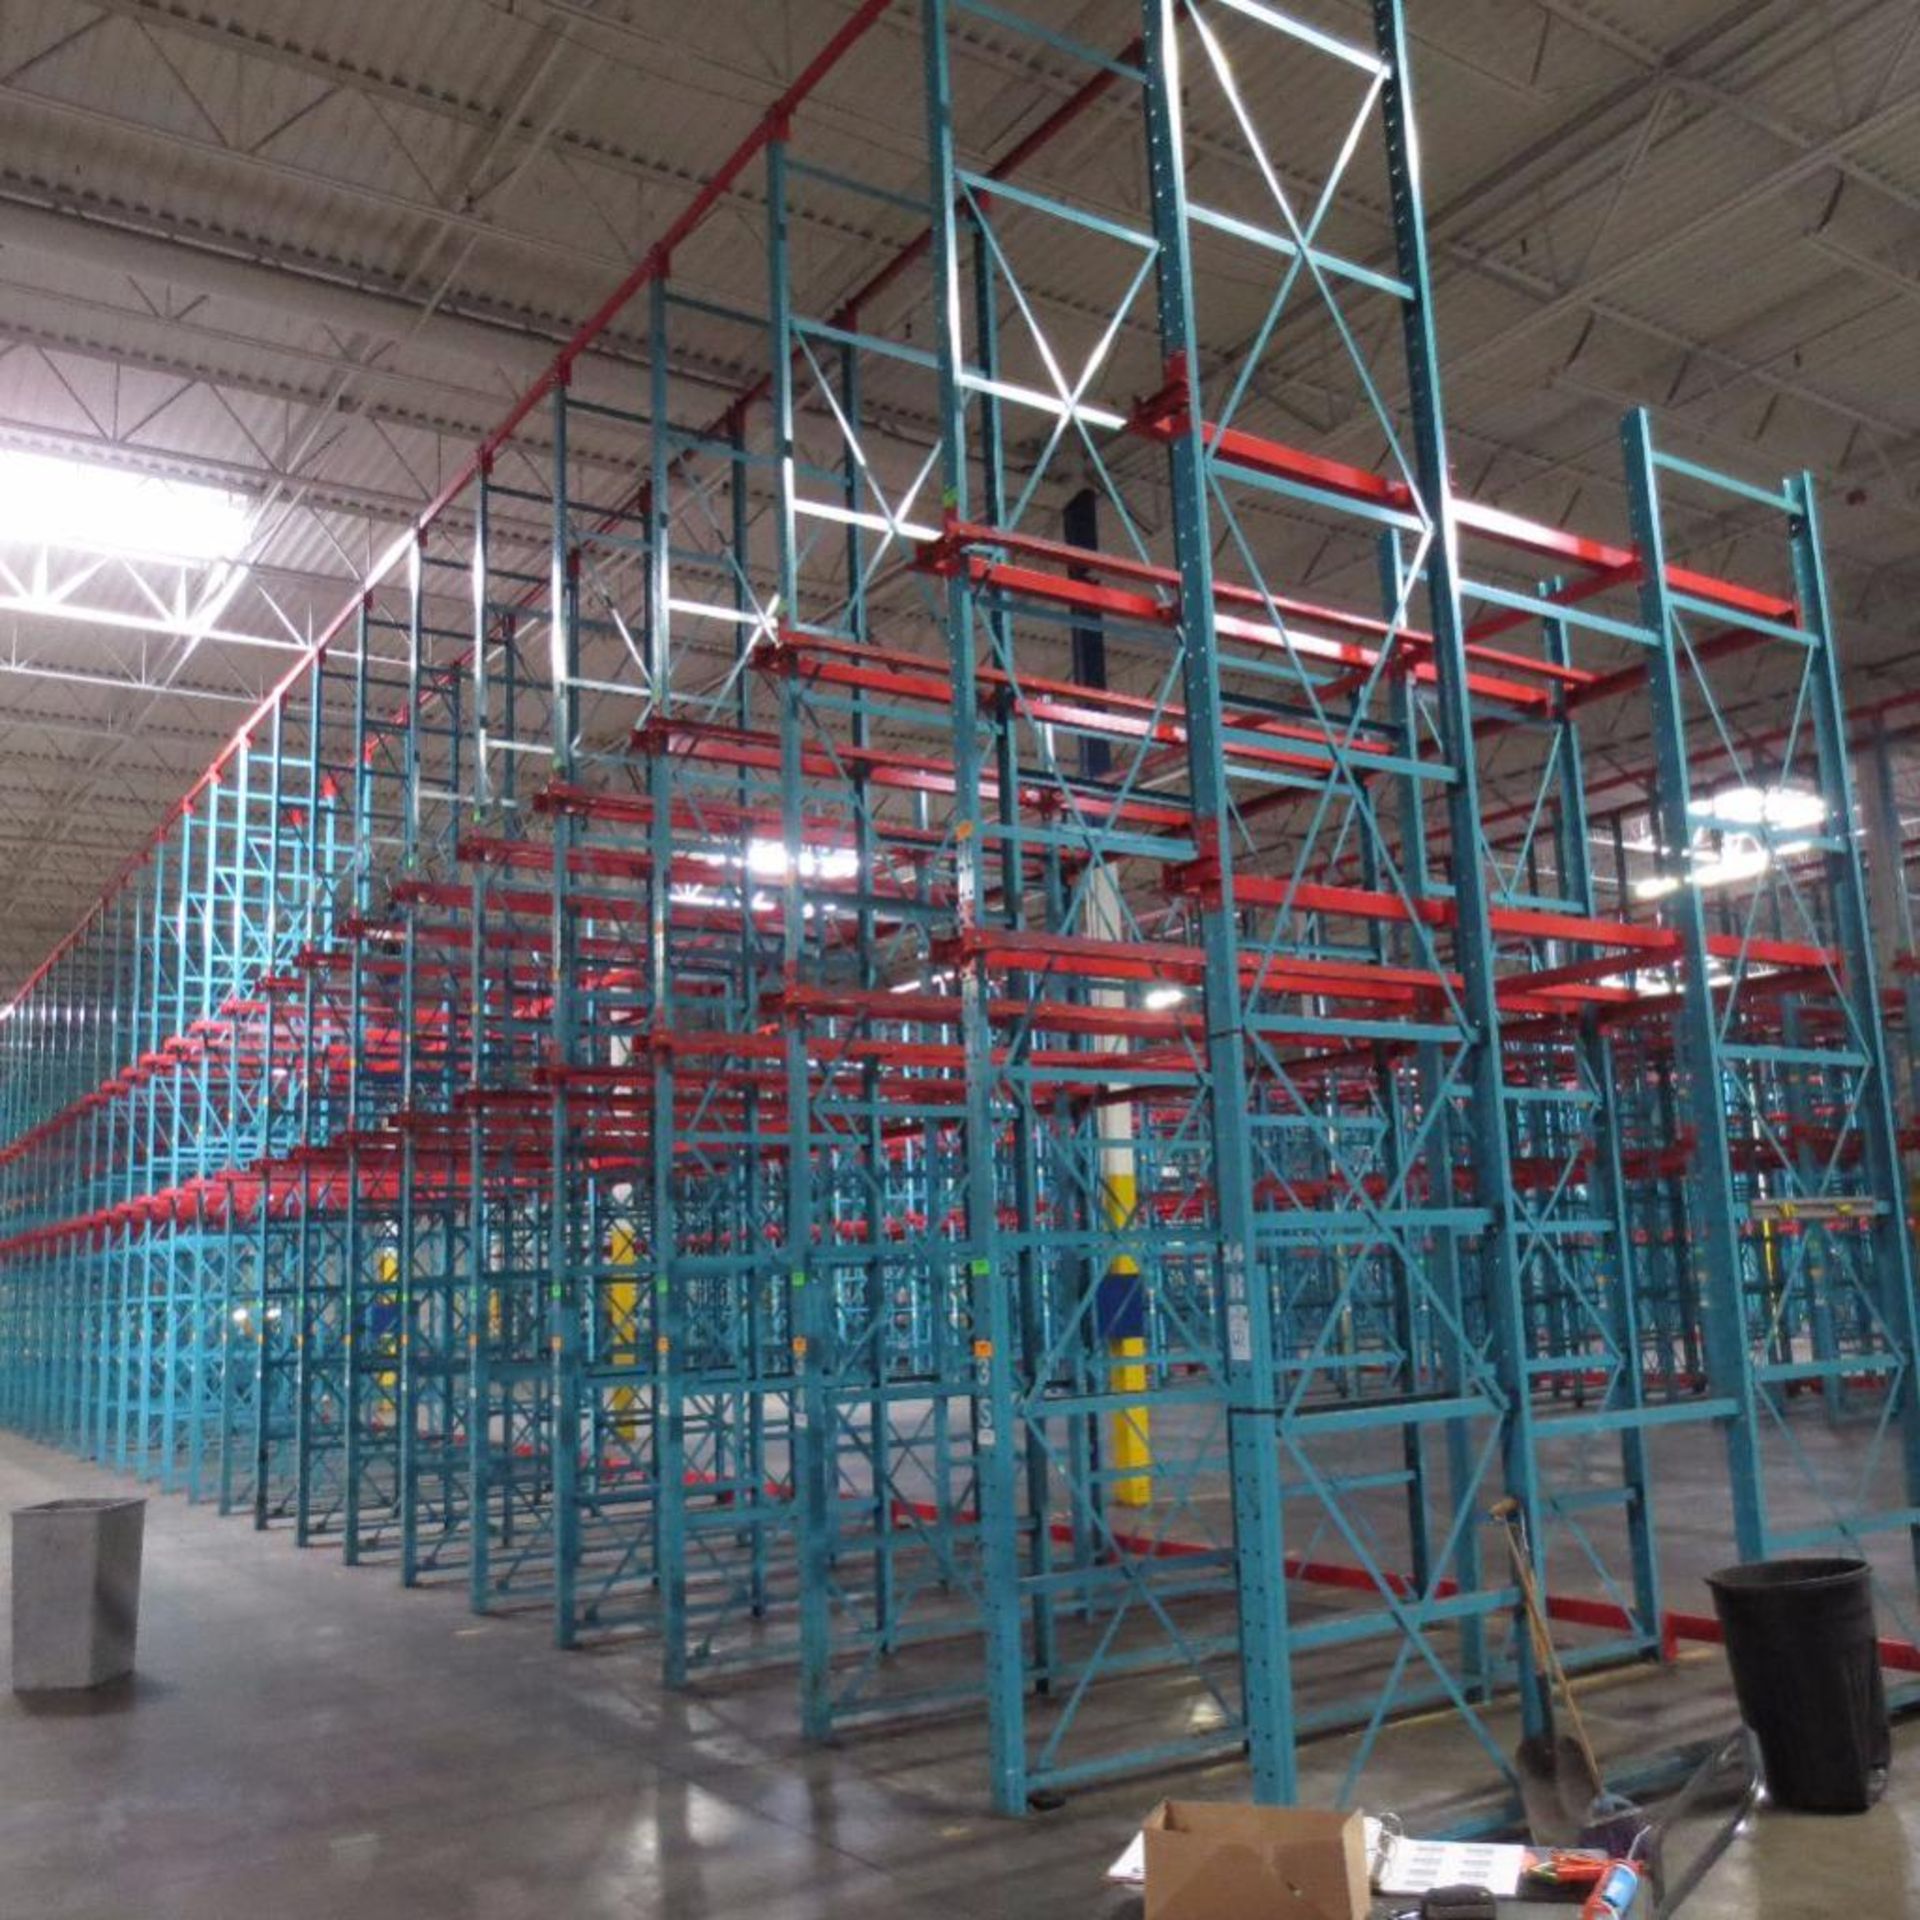 (35) Section of Pallet Racking, For Tall Stacked Pallets, 154' X 12' Deep Foot Print, 24' Tall